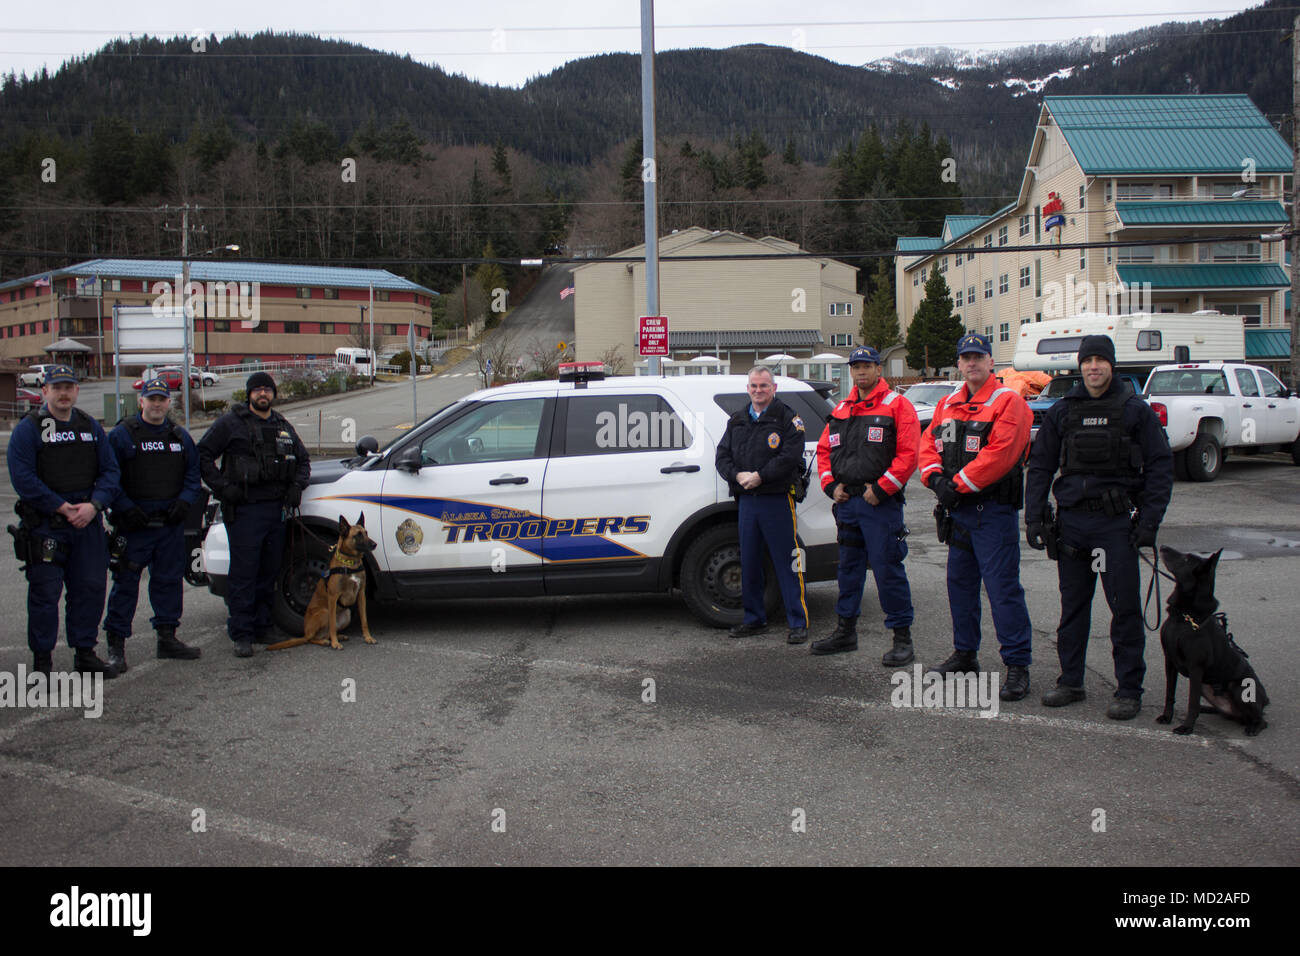 Members of the Coast Guard and Alaska State Troopers pose together following the completion of a joint law enforcement operation at the Alaska Marine Highway System ferry terminal in Ketchikan, Alaska, March 11, 2018. The agencies partnered together during the law enforcement operation to detect and deter illegal activity on Alaska's waterways. U.S. Coast Guard photo by Petty Officer 3rd Class Marissa Gilbert. Stock Photo